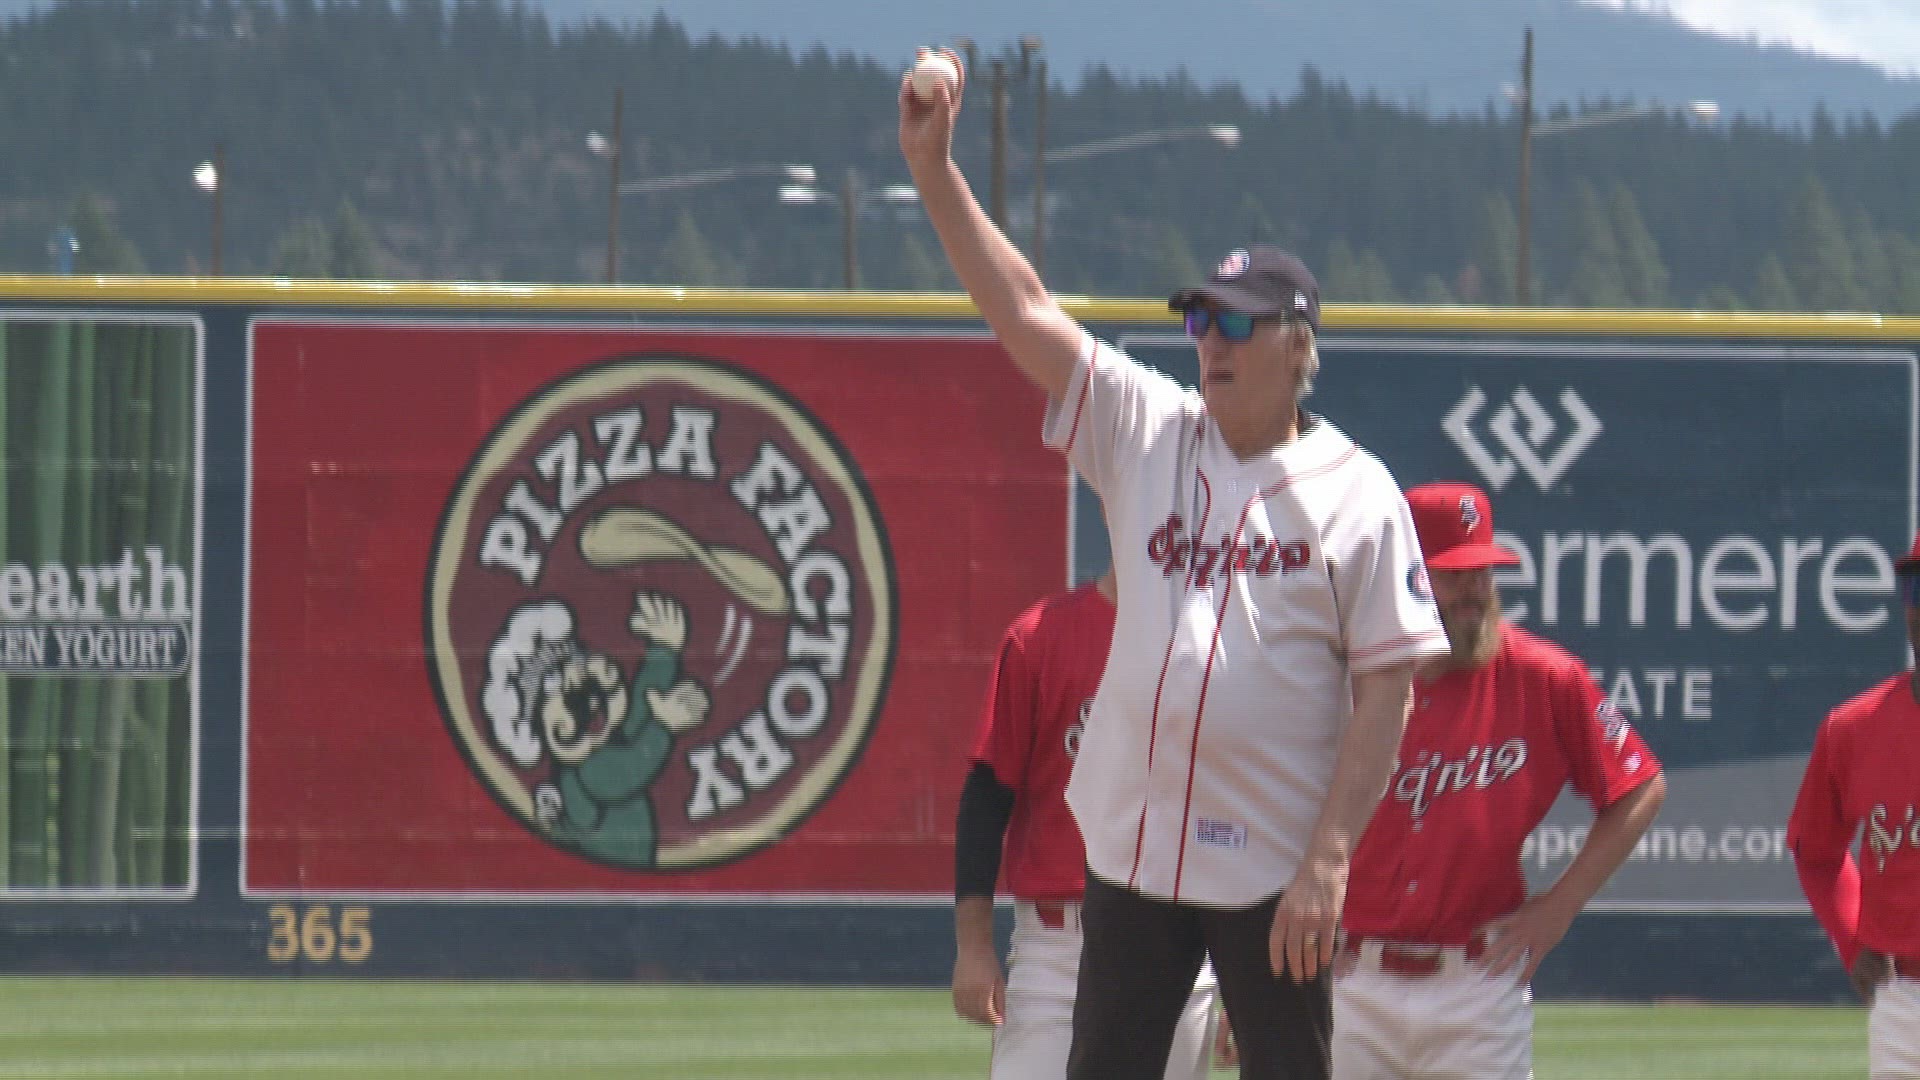 Craig T. Nelson, also knows as Coach, returned home to throw out the first pitch at the Spokane Indians game on Father's Day.